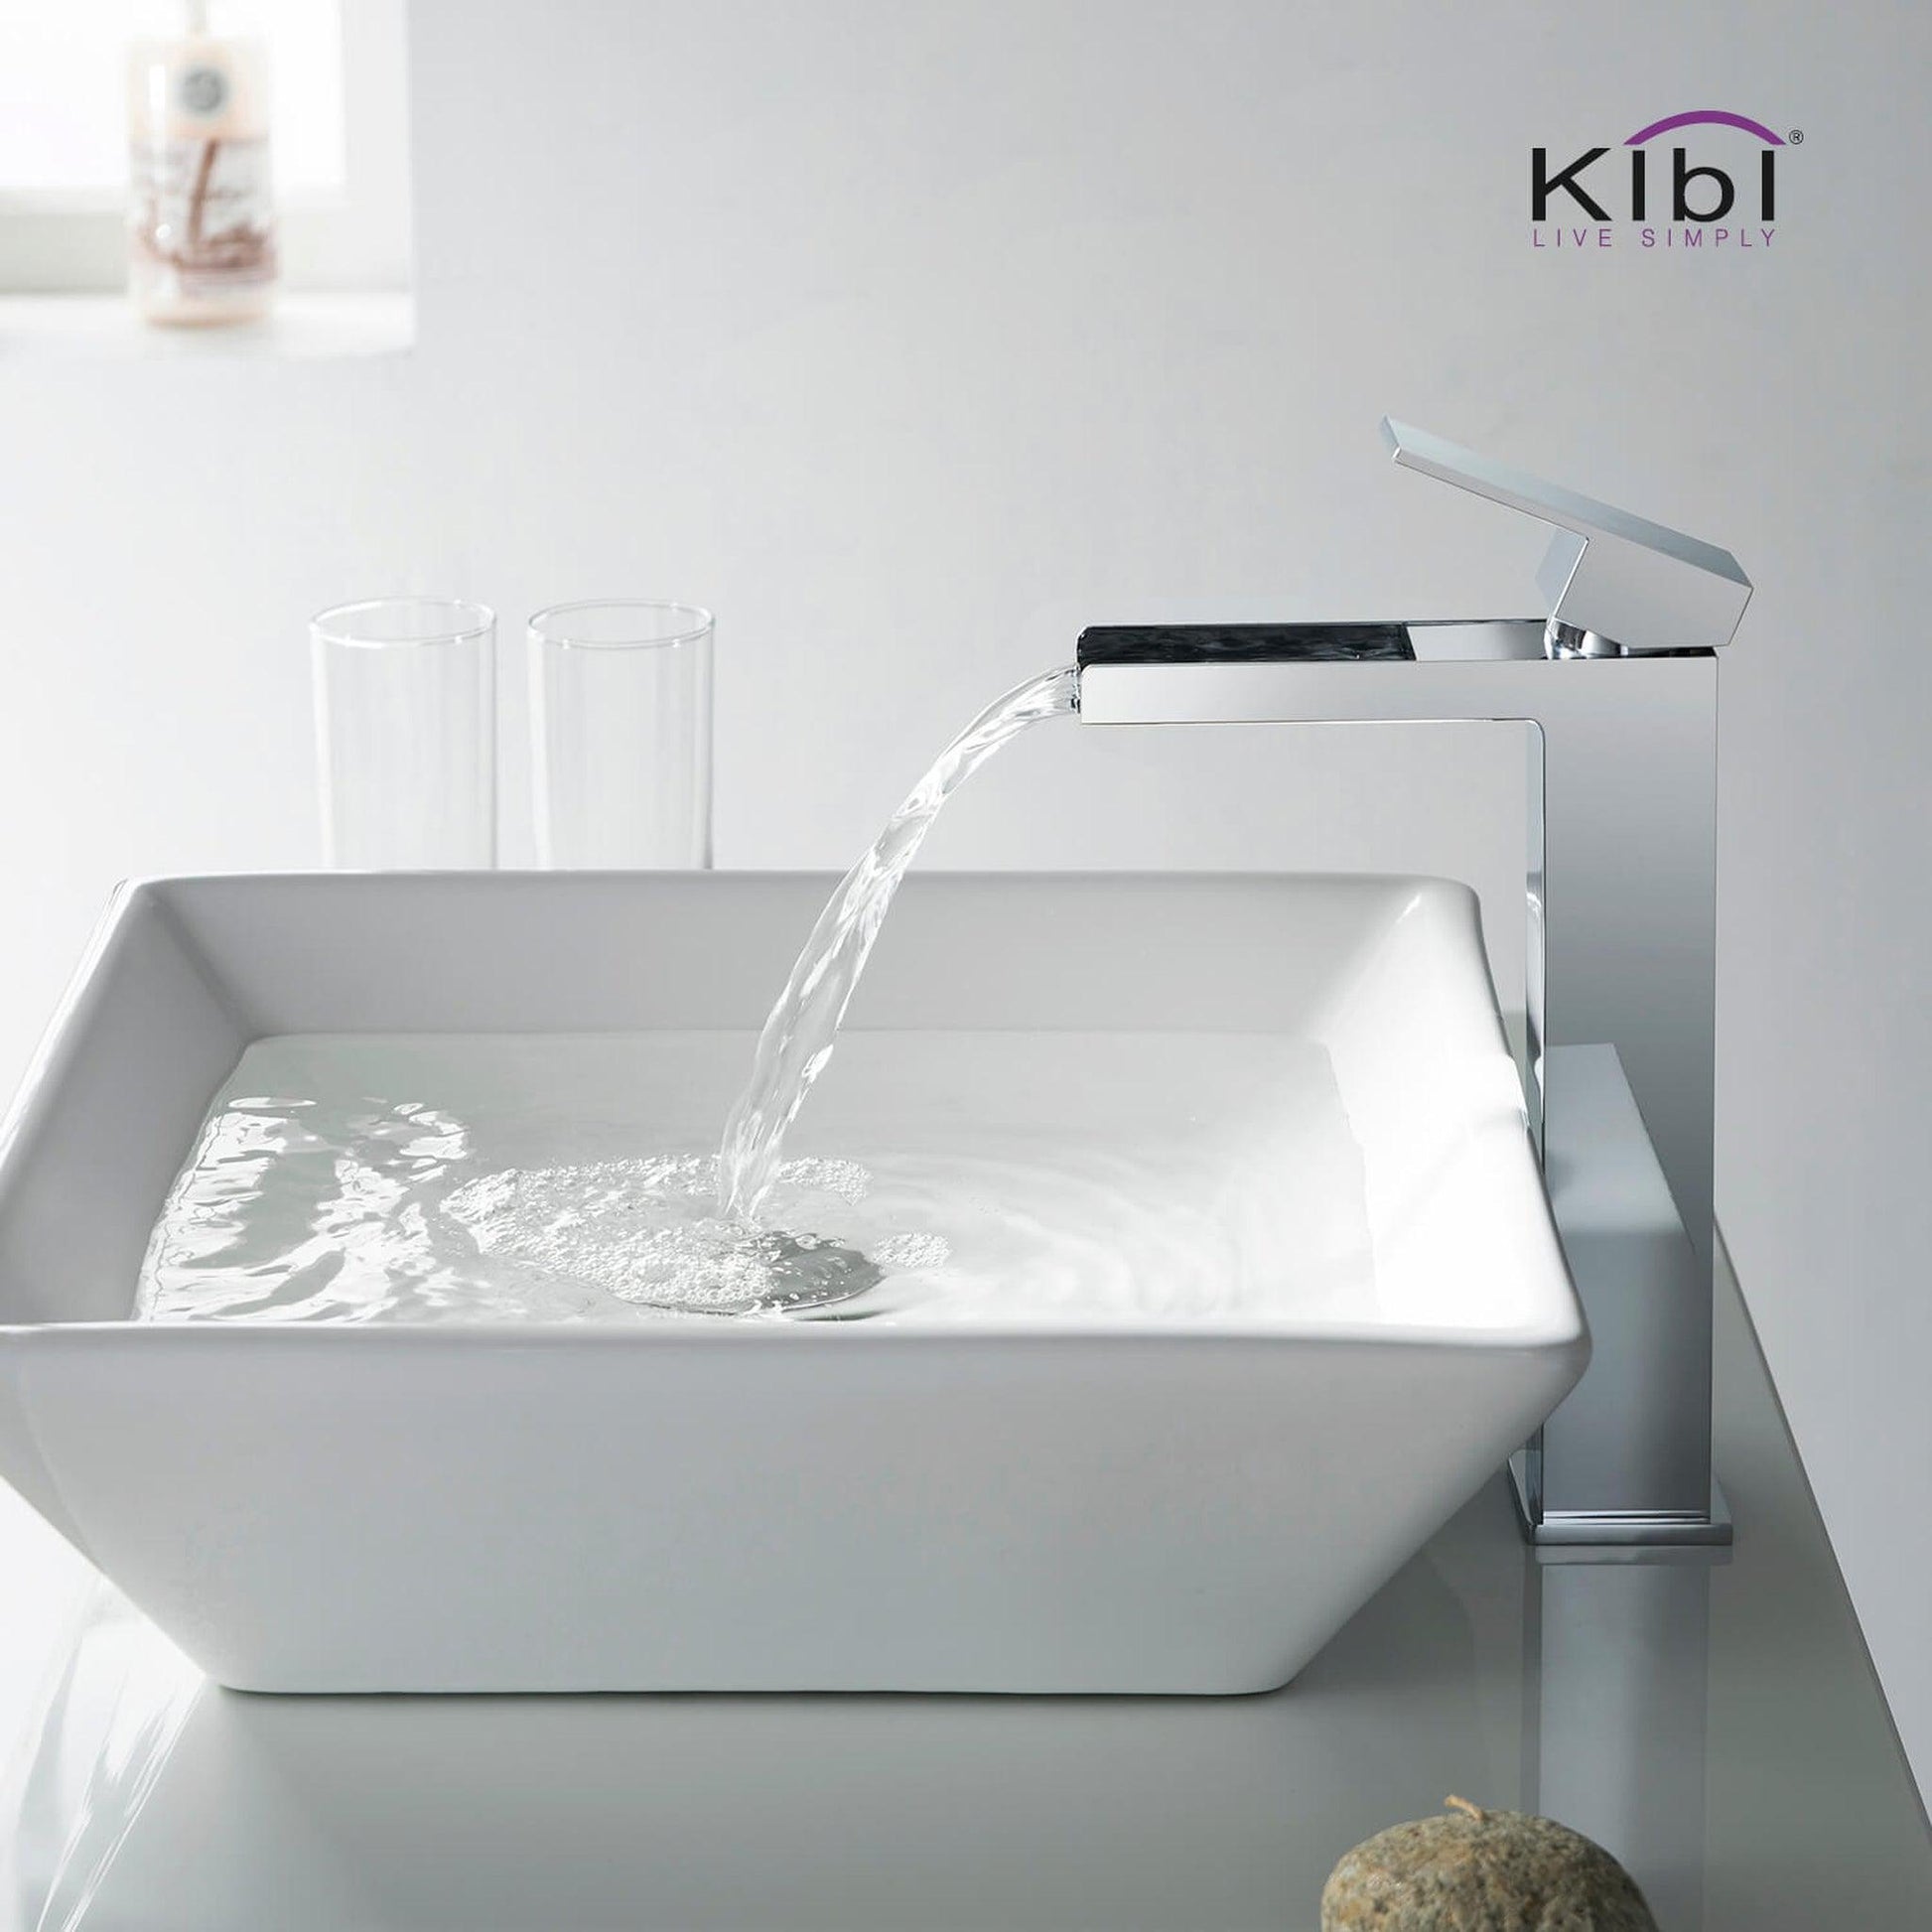 KIBI Waterfall Single Handle Chrome Solid Brass Bathroom Vanity Vessel Sink Faucet With Pop-Up Drain Stopper Small Cover Without Overflow